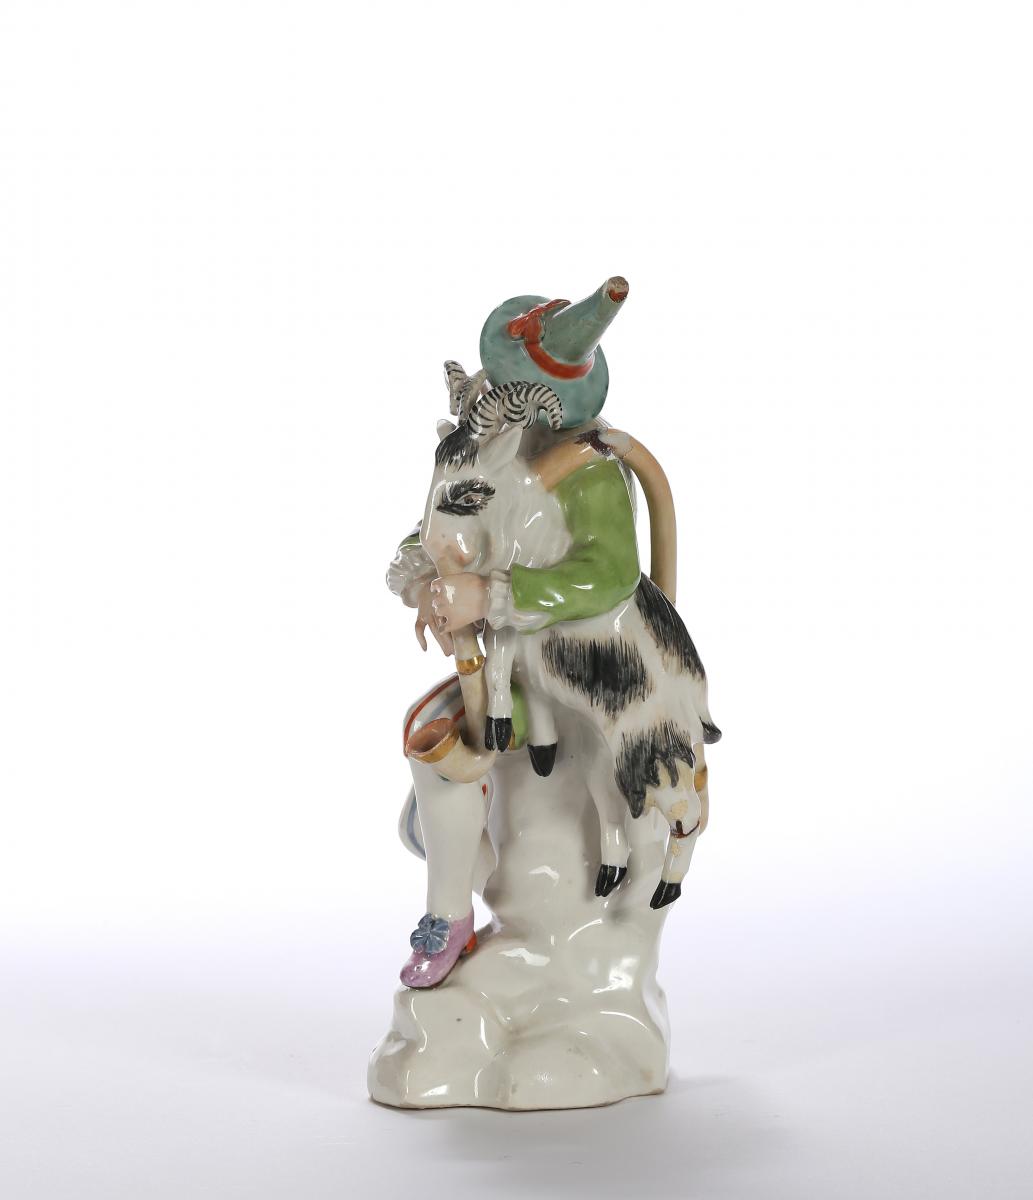 A Höchst Figure of Harlequin or Hanswurst with Bagpipe